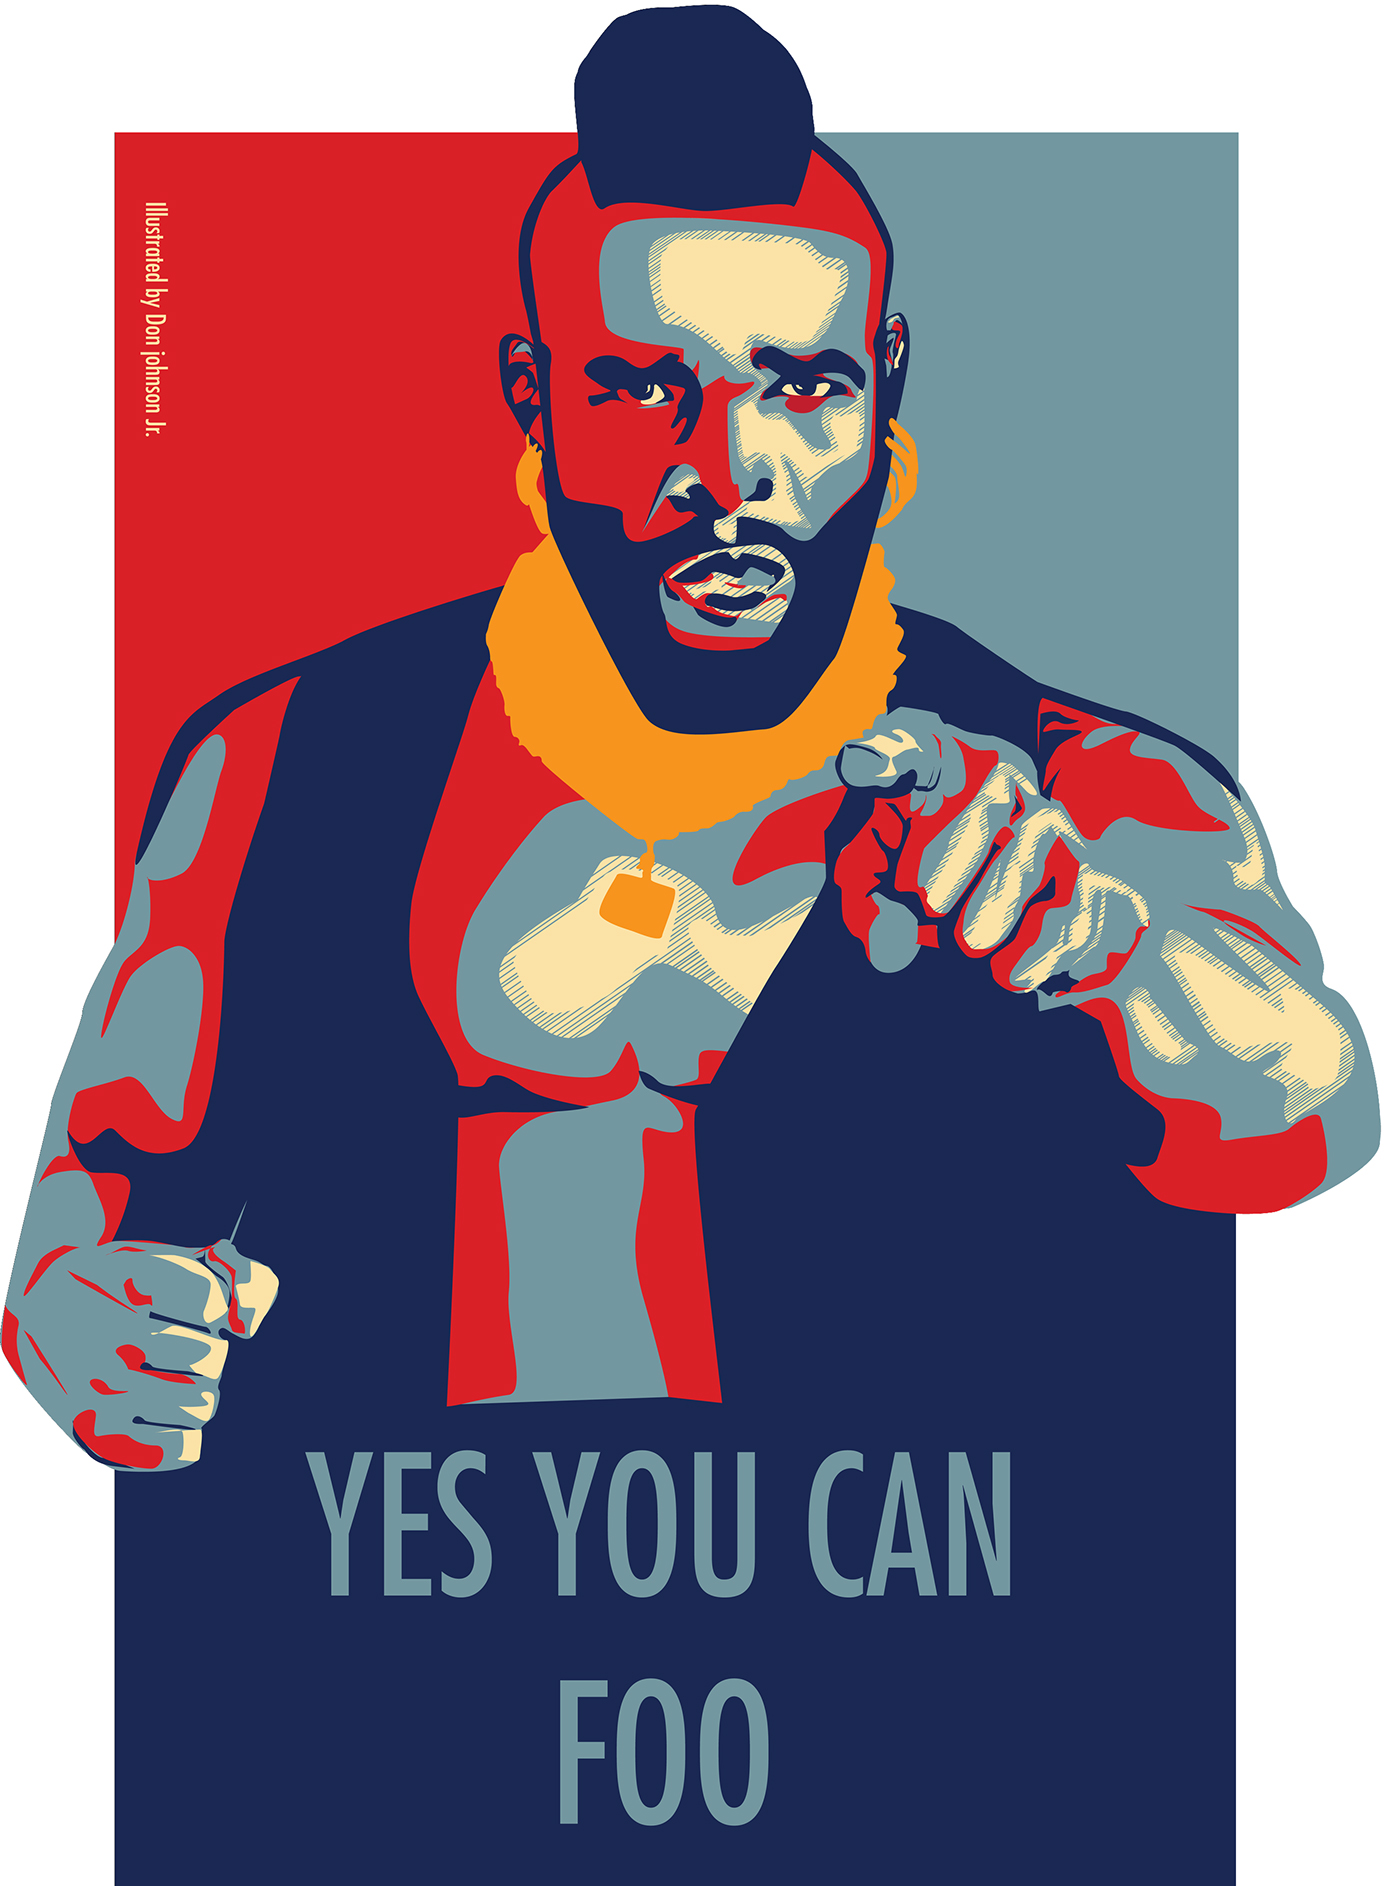 Yes you can use the. Yes you can. Yes you can картинка. You Yes you. Картина Yes you can.